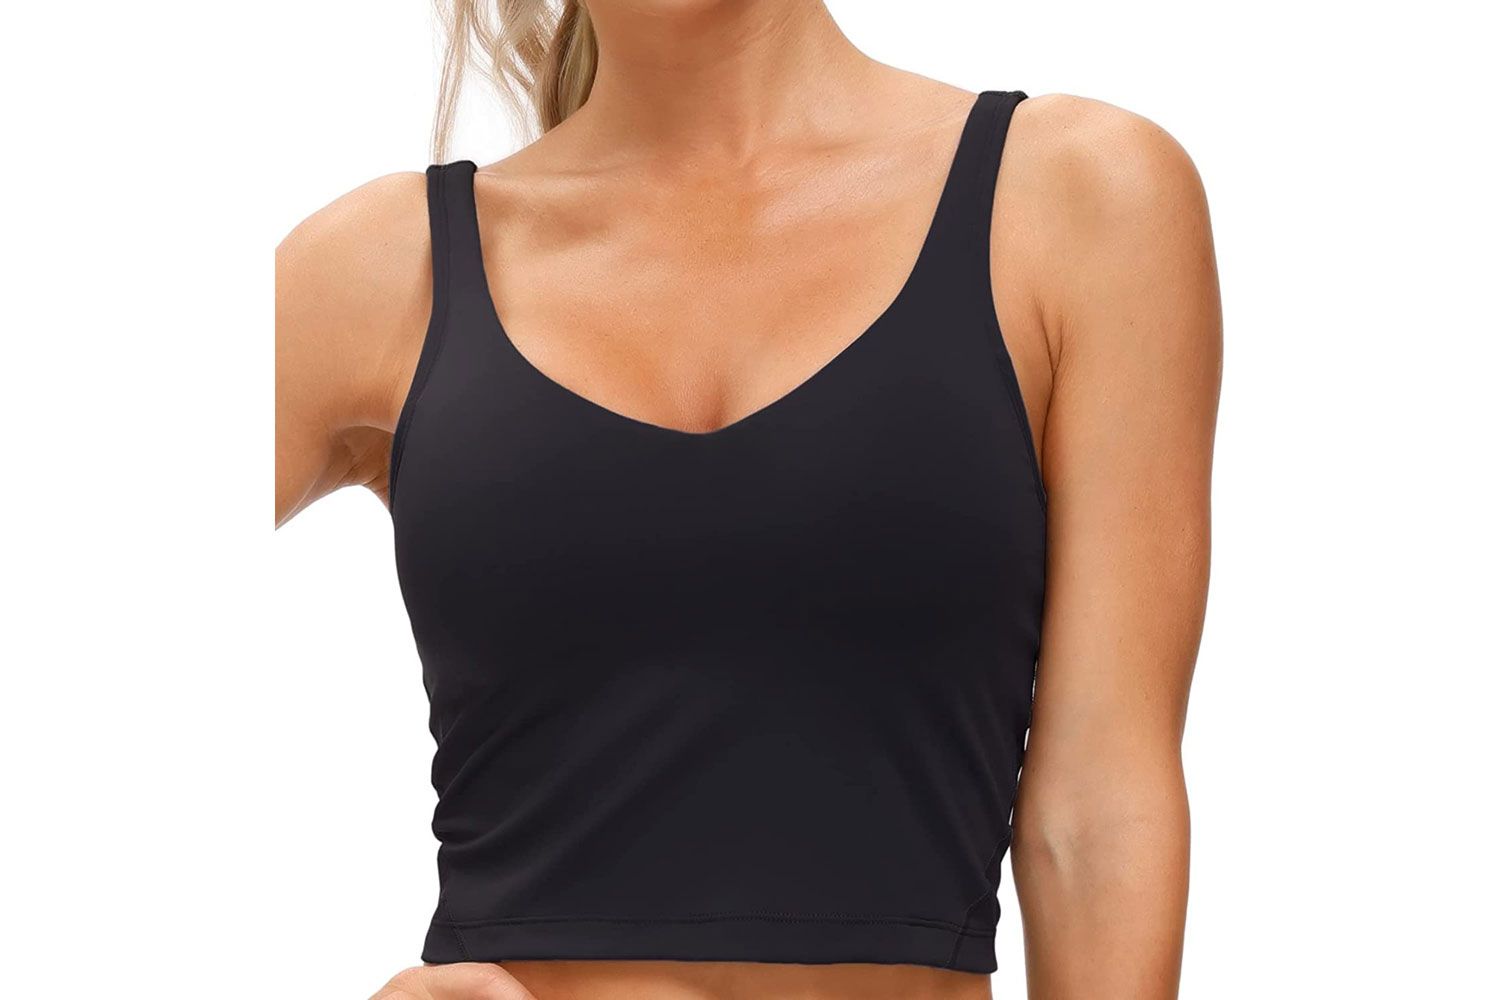 Amazon THE GYM PEOPLE Womens' Sports Bra Longline Wirefree Padded with Medium Support